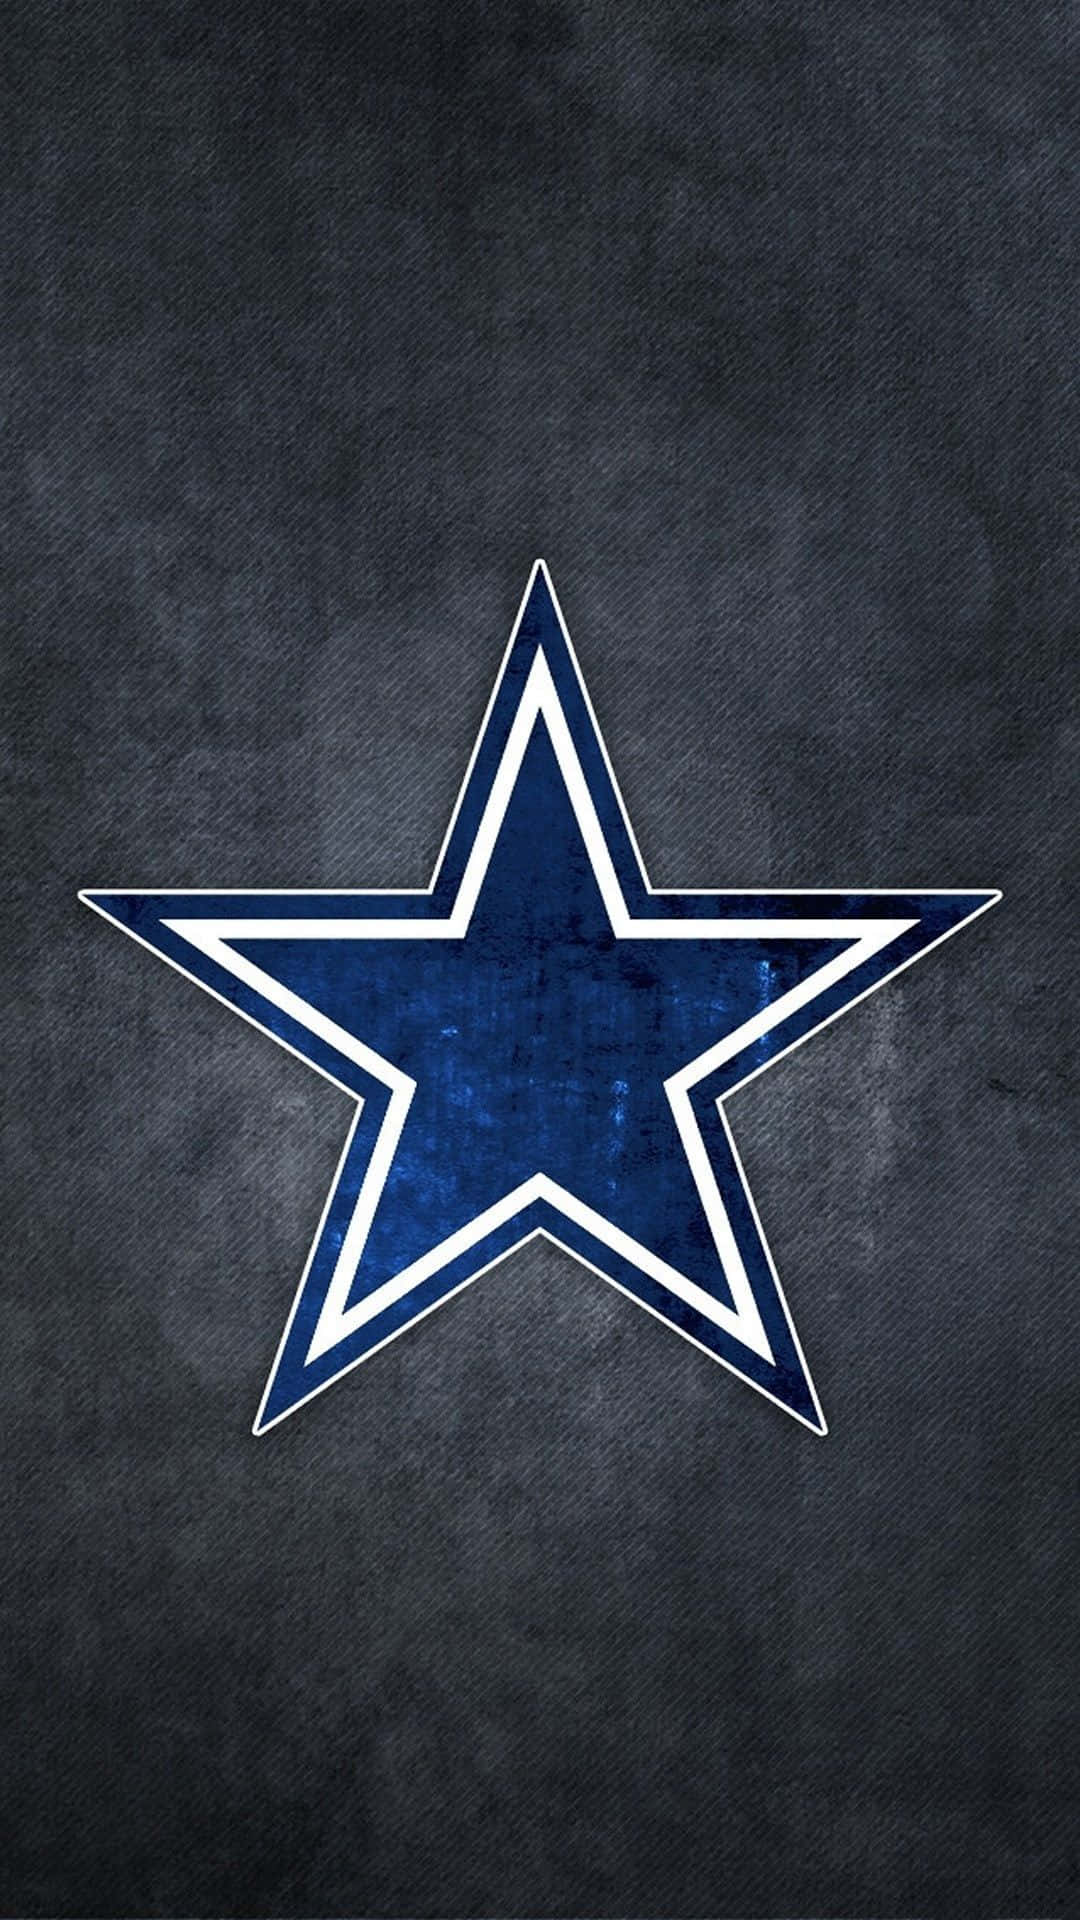 Show your spirit with a Cowboy themed phone! Wallpaper